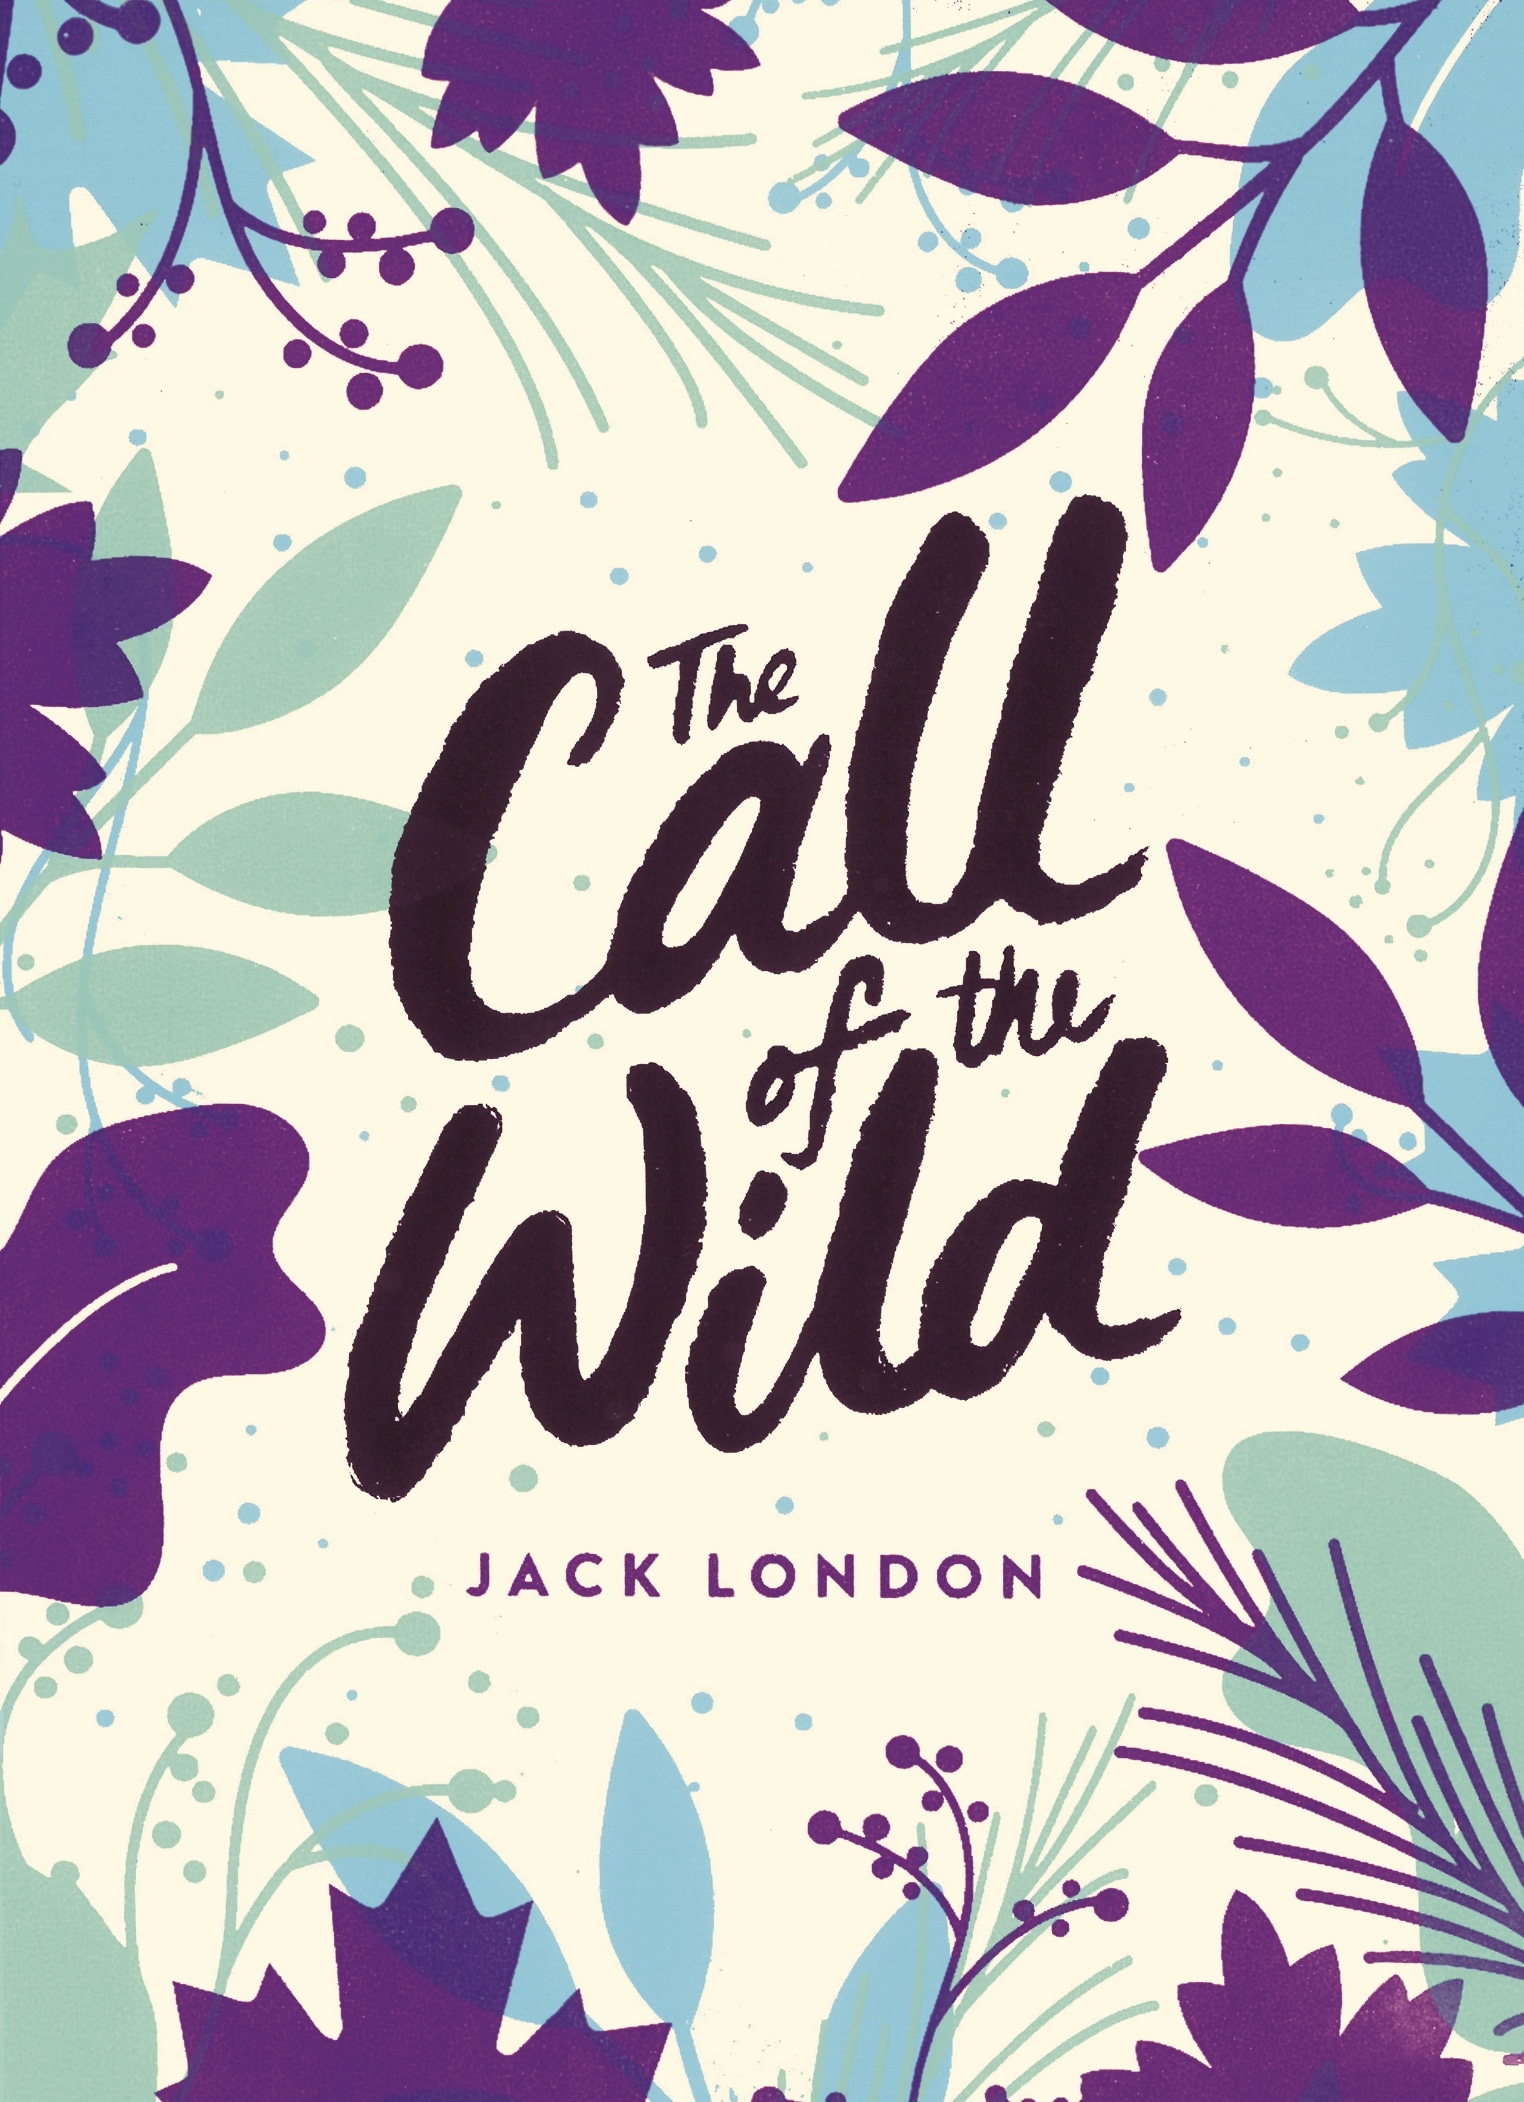 Book “The Call of the Wild” by Jack London, Melvin Burgess — April 16, 2020